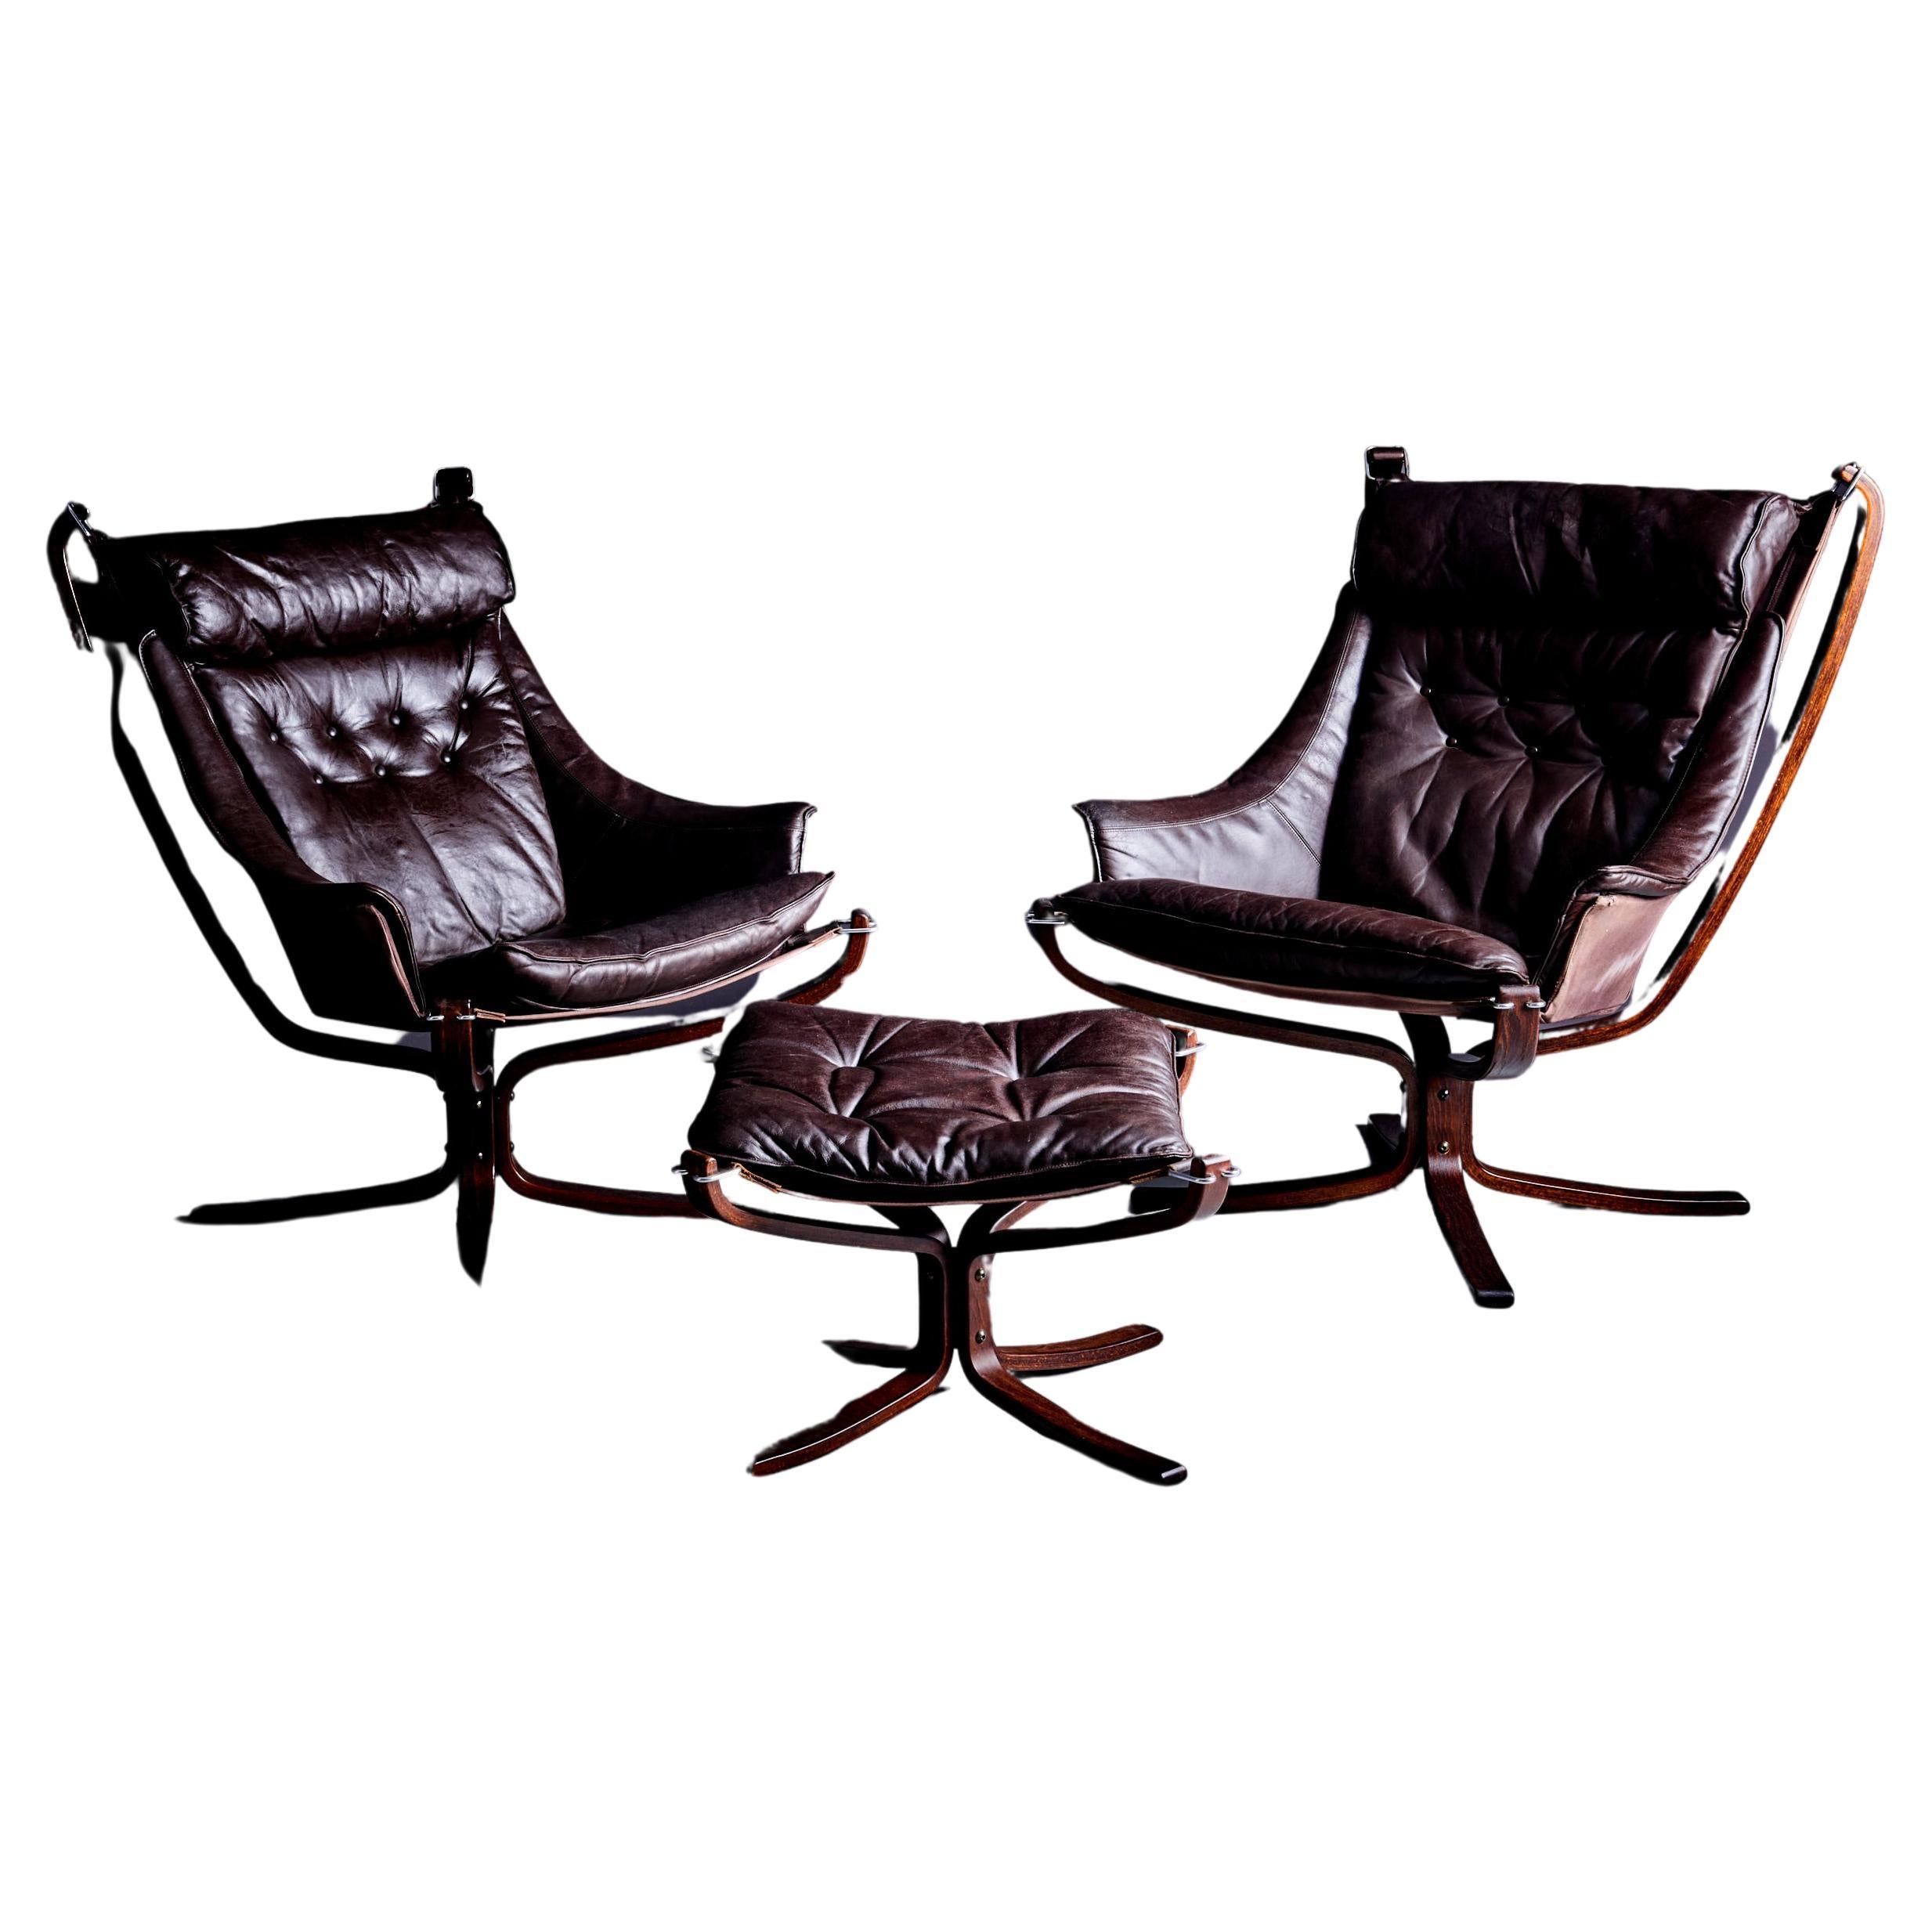 Pair of Falcon Chairs with stool by Sigurd Ressell Norway - 1970s For Sale